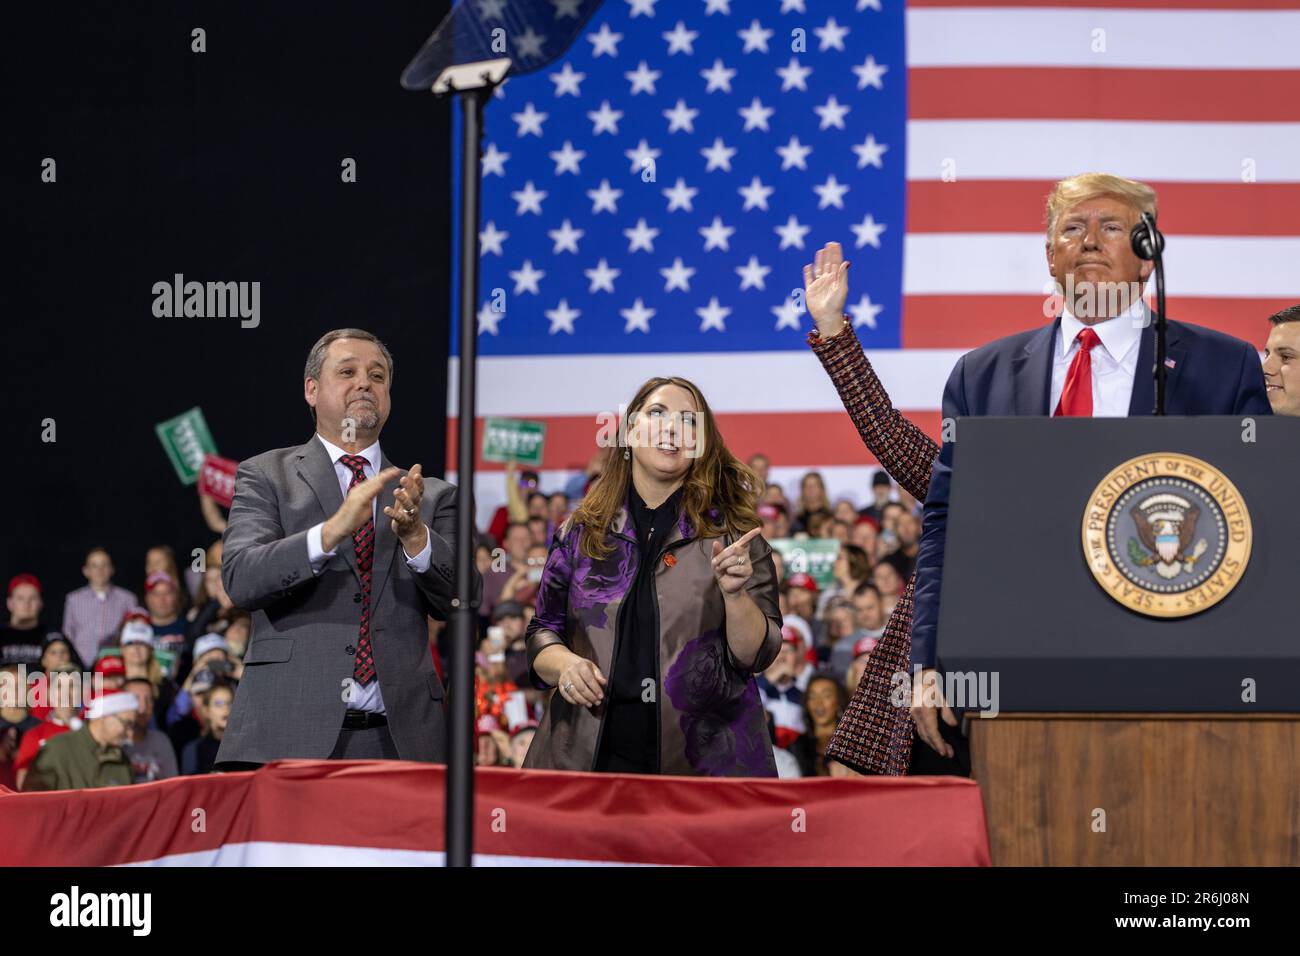 President Donald Trump speaks at a rally in Battle Creek, Michigan concurrent to the House of Representatives voting to impeach him. Stock Photo